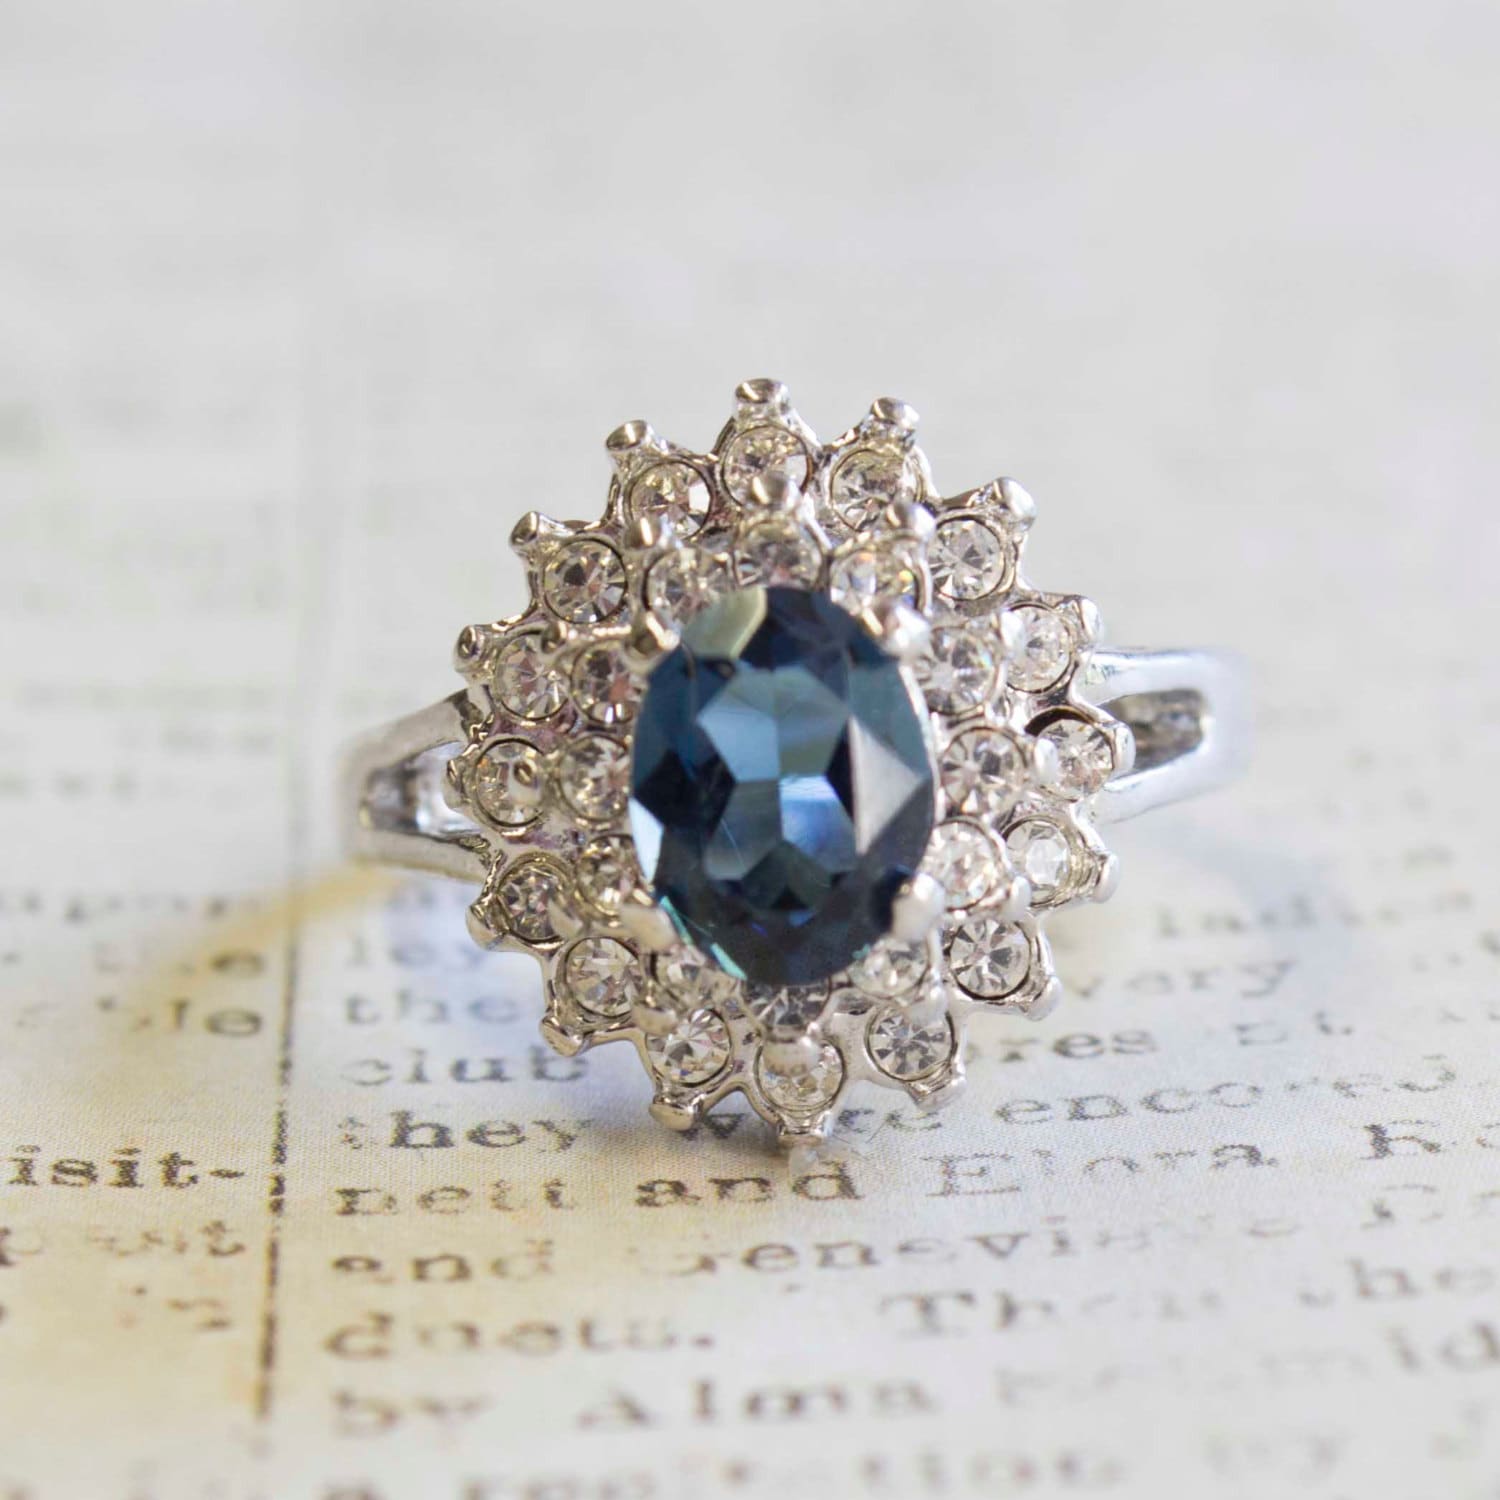 Vintage Ring 1970s Sapphire and Clear Swarovski Crystals 18k and White Gold Silver Ring #R1352 - Limited Stock - Never Worn